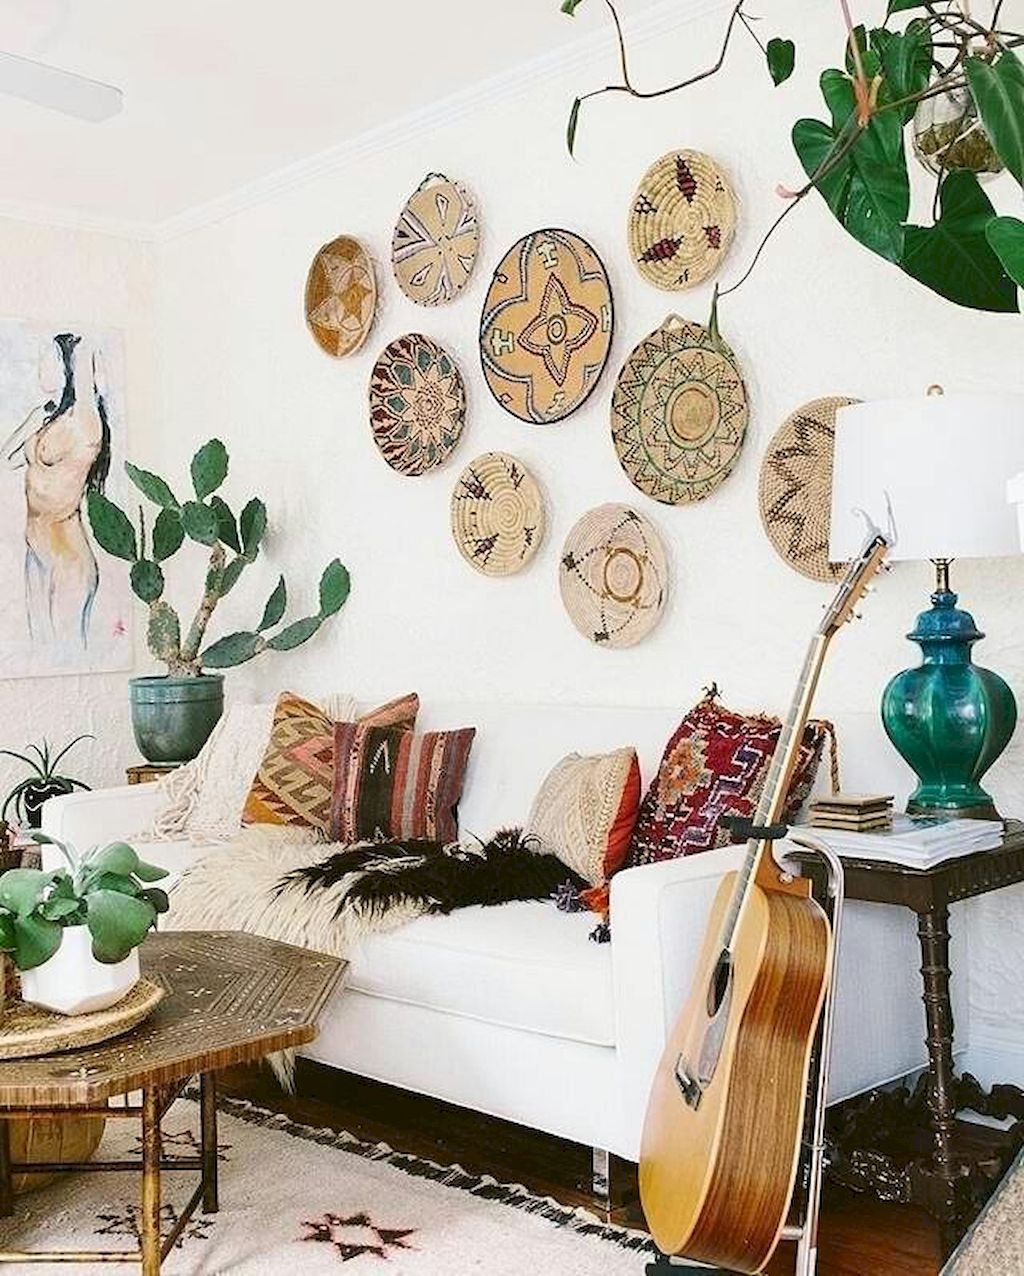 Bohemian living room with wall displays.  Source: willieclancyfestival.com